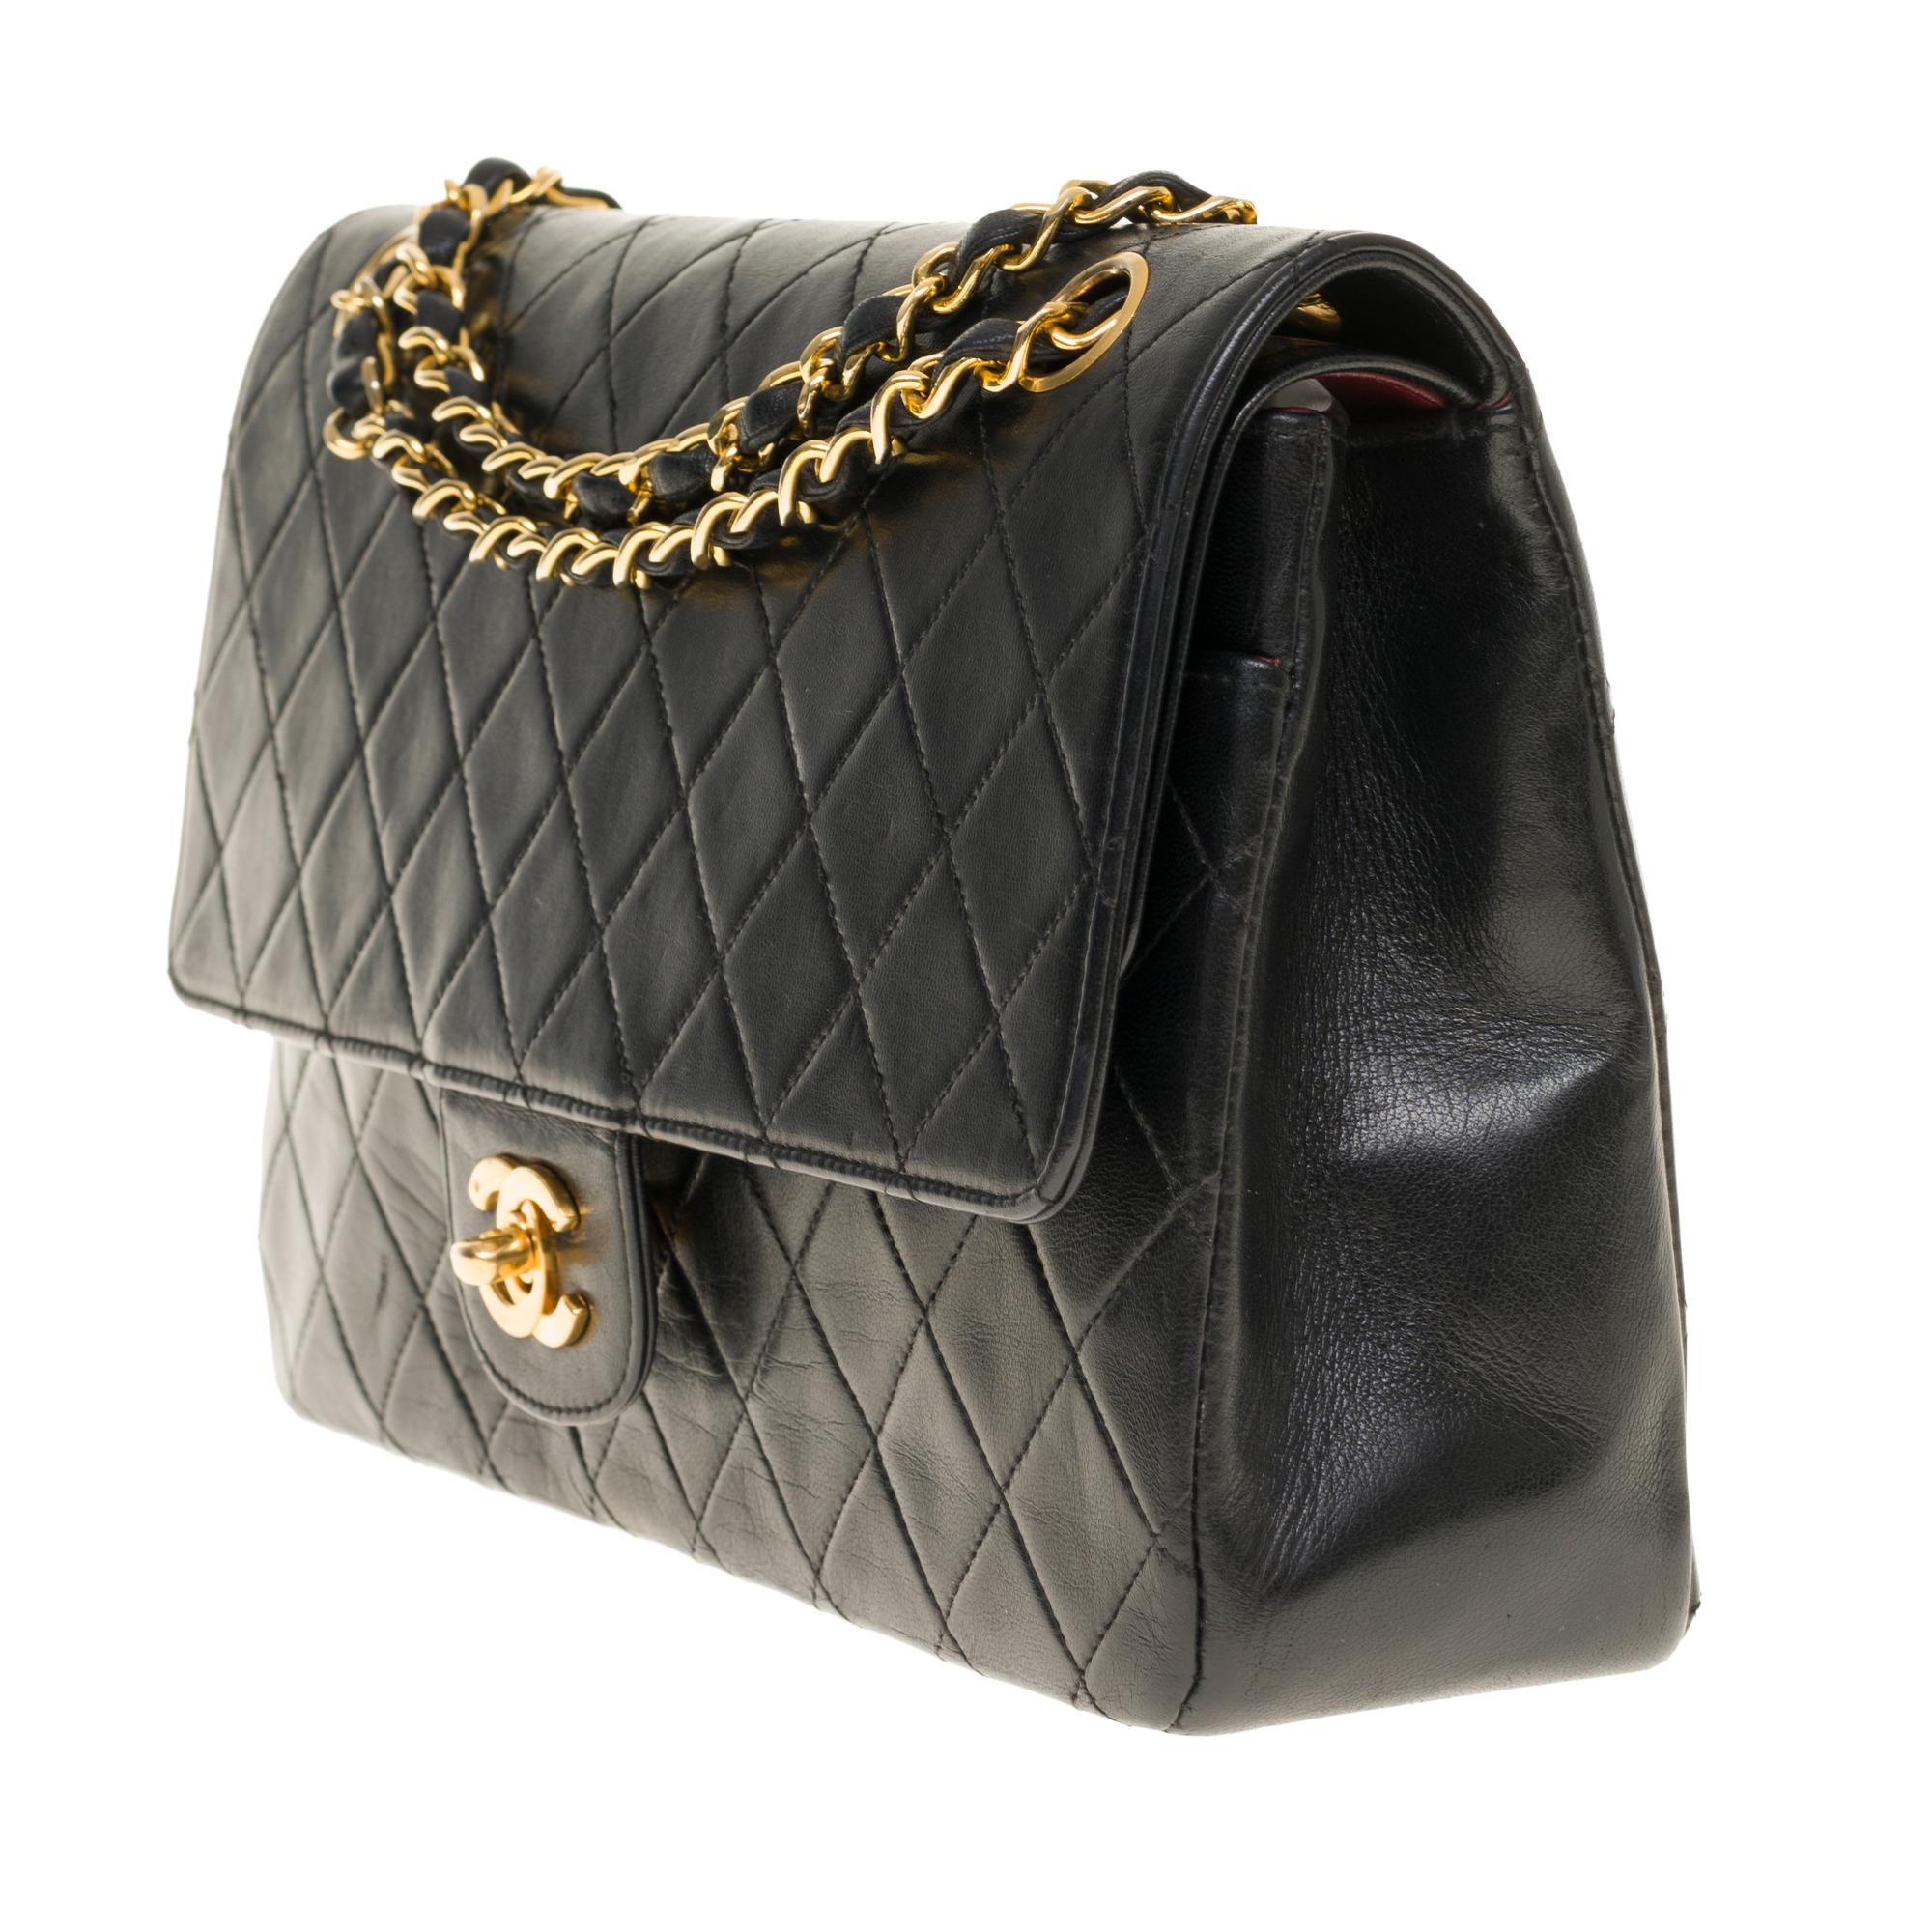 Black Chanel Classic 27cm shoulder bag in black quilted lambskin and gold hardware